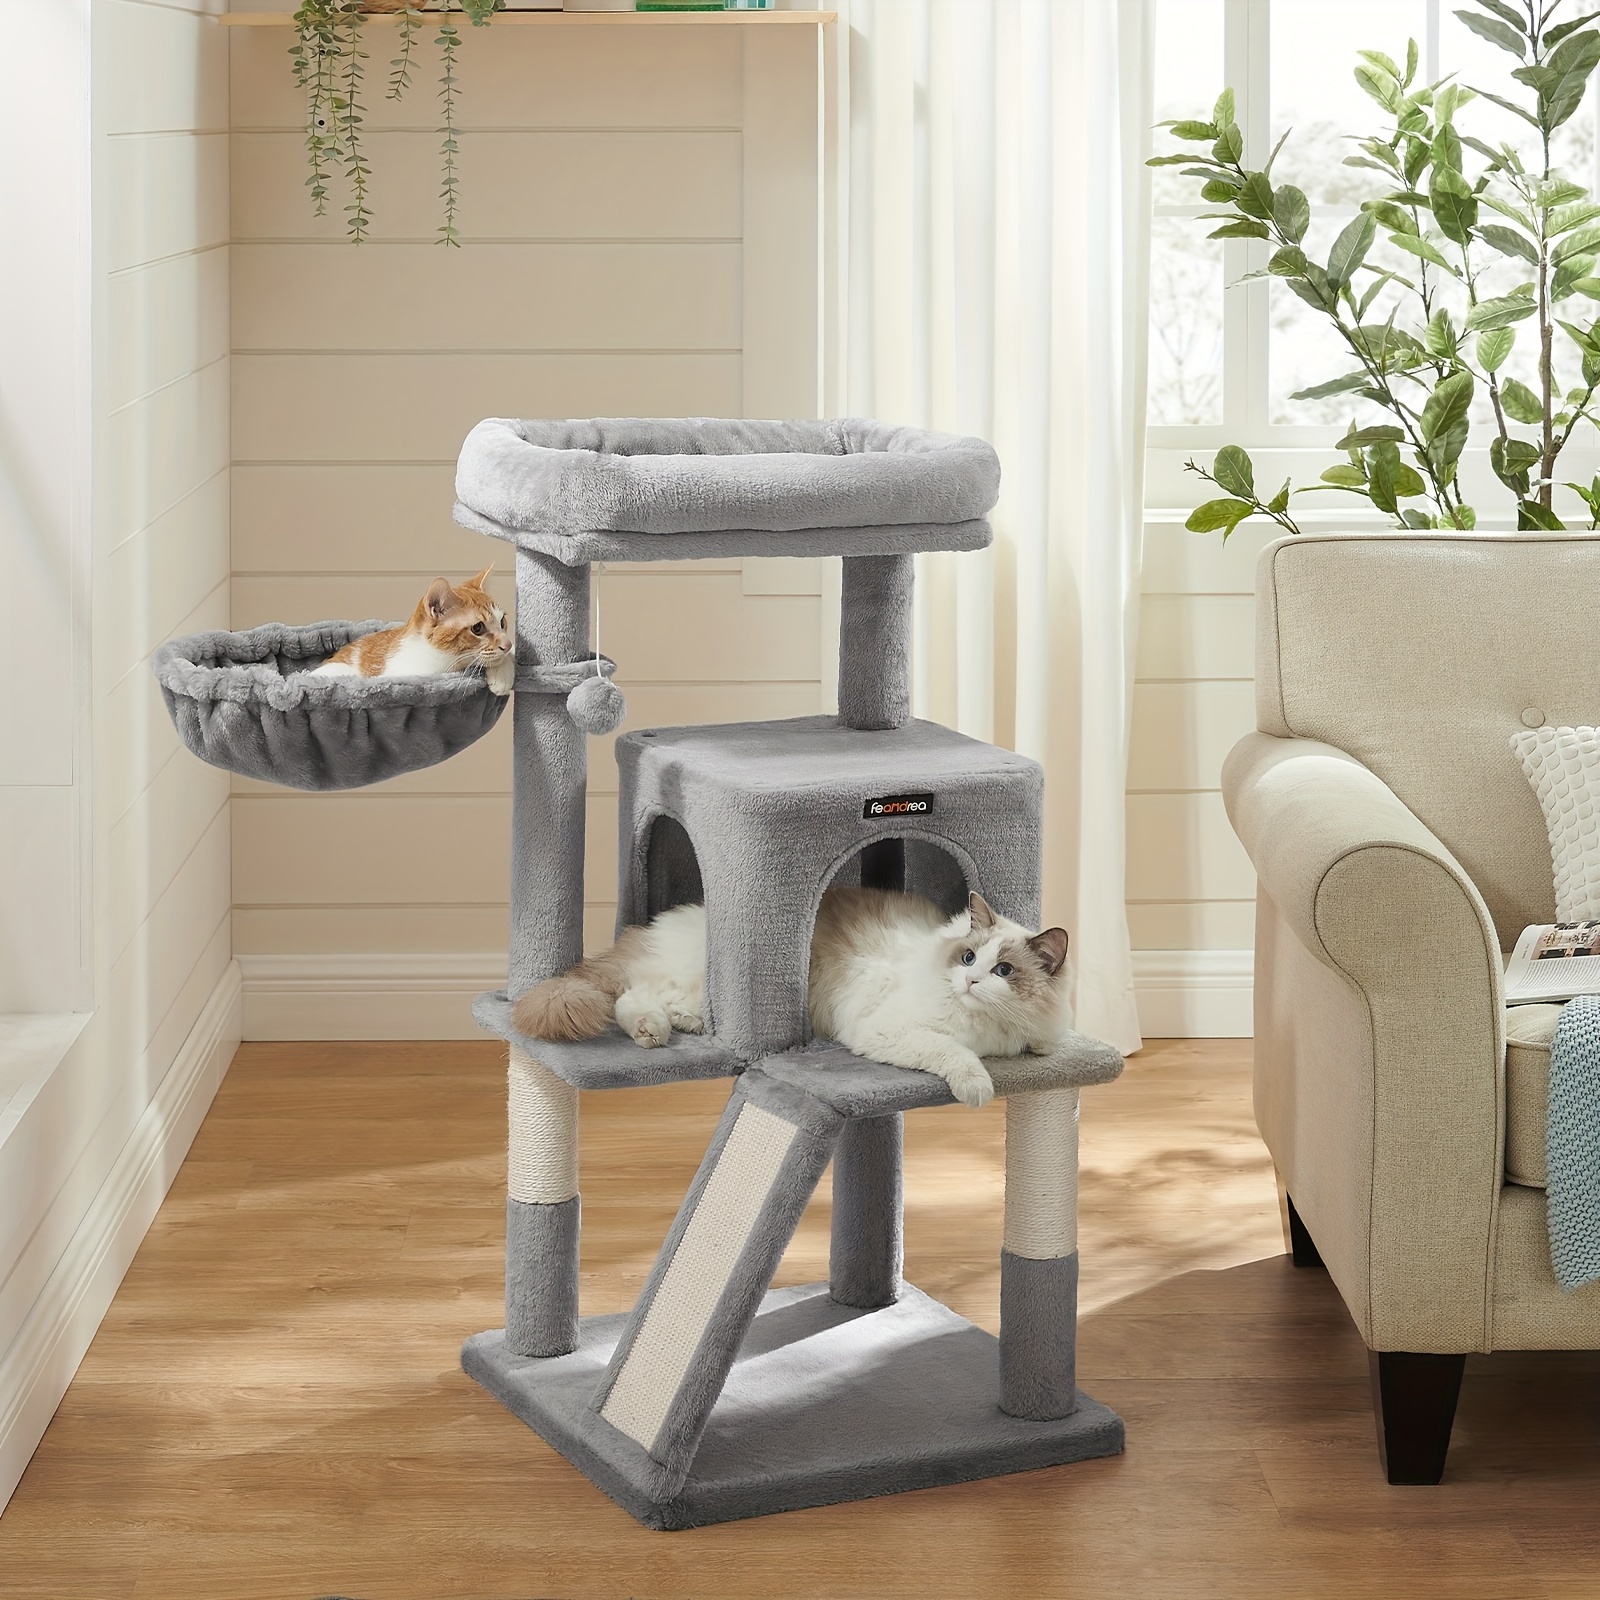 

Feandrea Cat Tree, Small Cat Tower With Widened Perch For Large Cats Indoor, Kittens, 37.8-inch Multi-level Cat Condo With Scratching Posts And Ramp, 2-door Cat Cave, Cat Basket, Light Gray